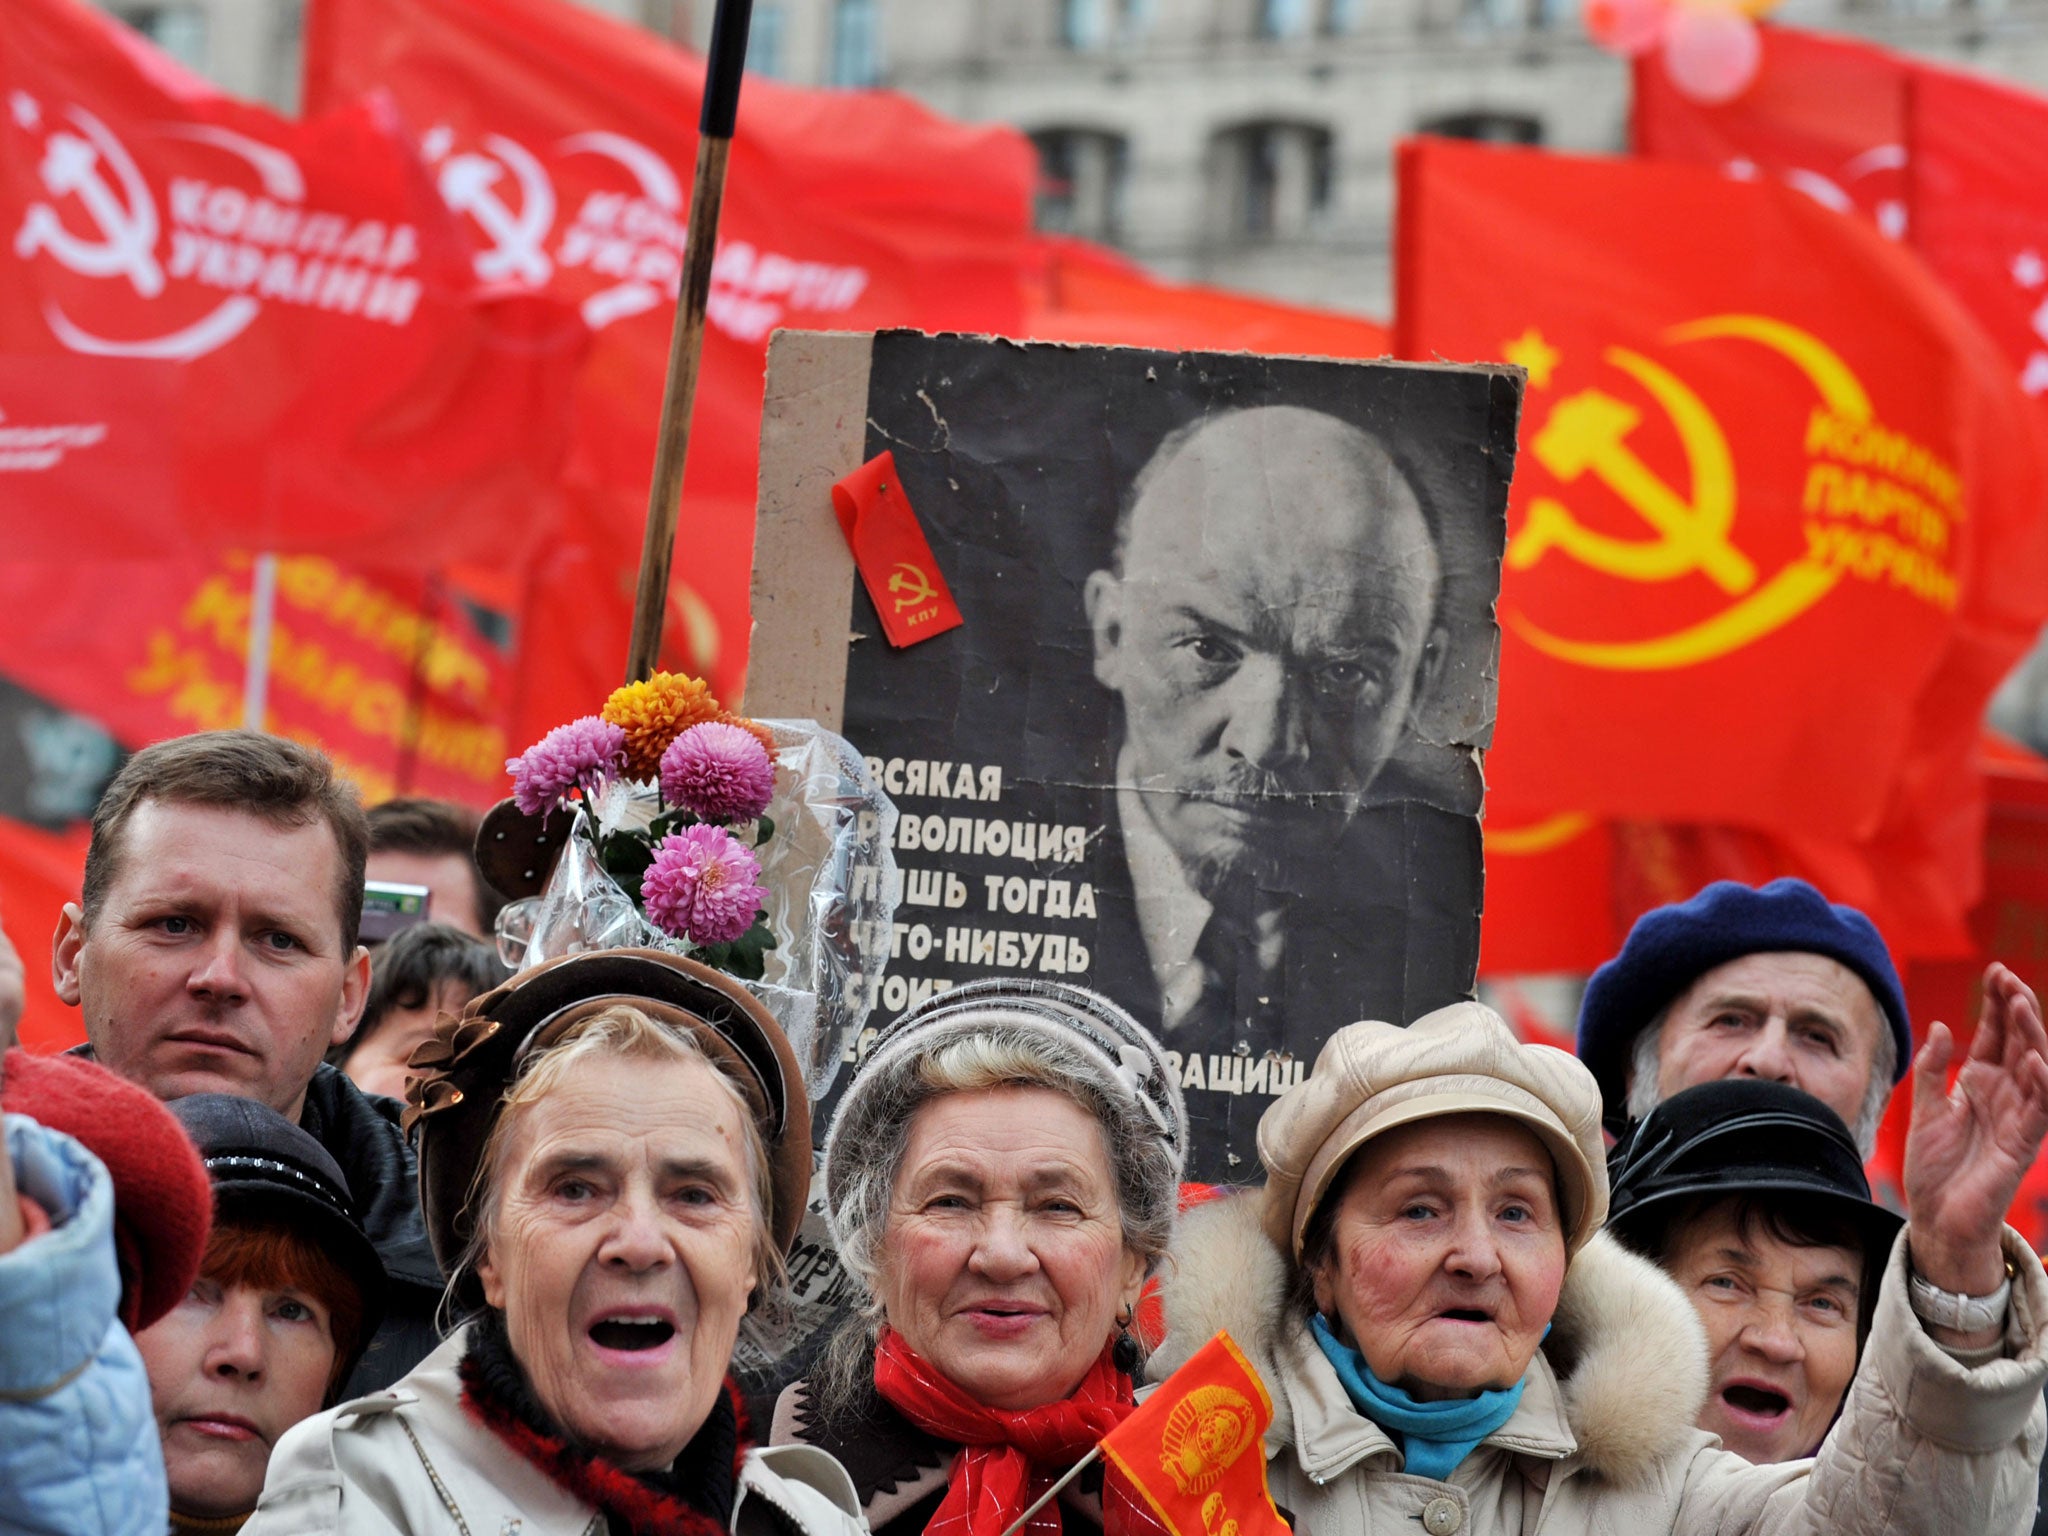 Activists of the Communist party gather during a rally on Independence Square in Kiev on 7 November, 2010